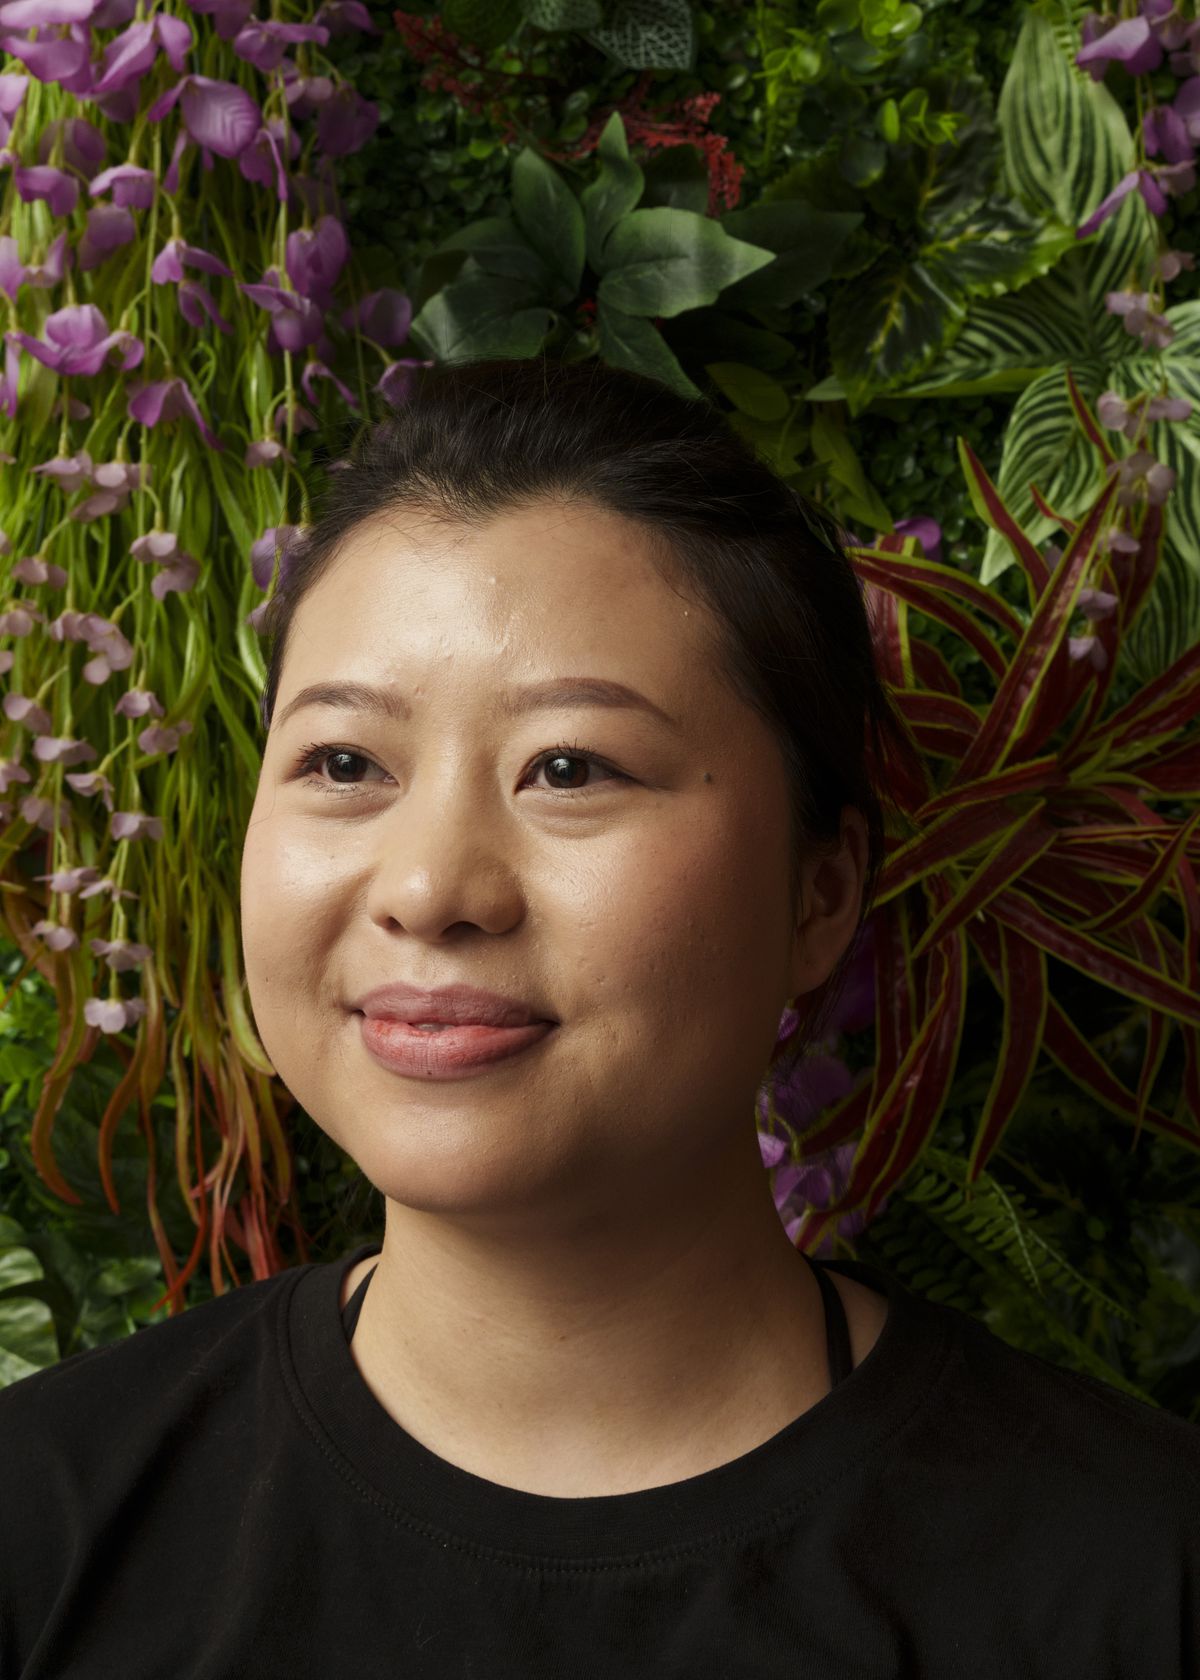 Aunyamanee Ritneatikun, wearing a black shirt with her hair pulled back, smiles and looks somewhere past the camera as she stands in front of green foliage and purple flowers. 